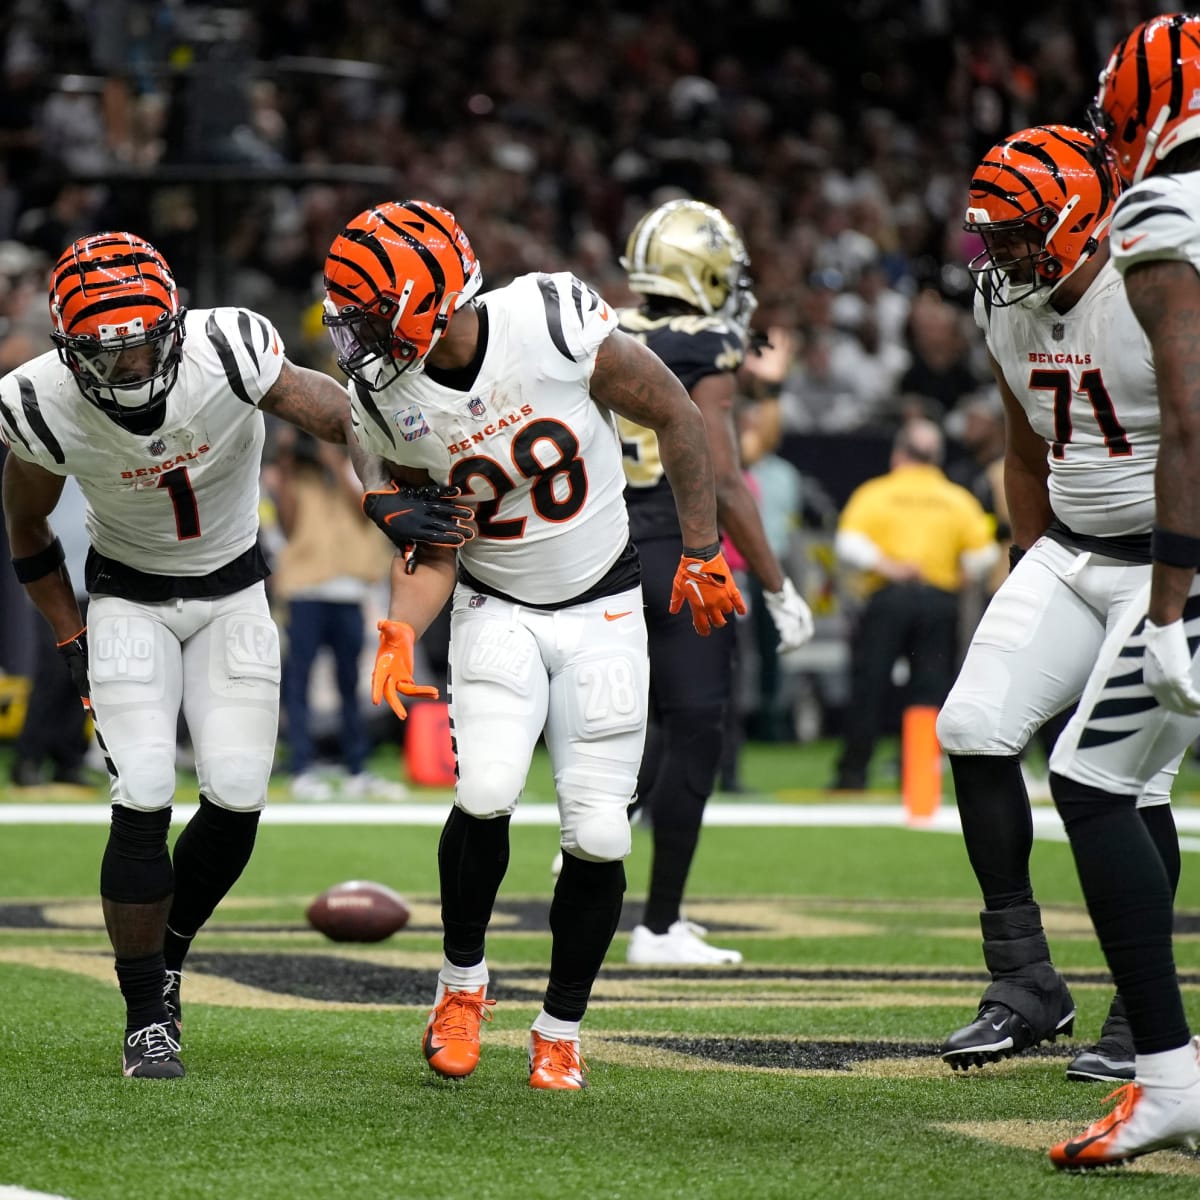 What makes the Bengals' comeback win over Saints so special